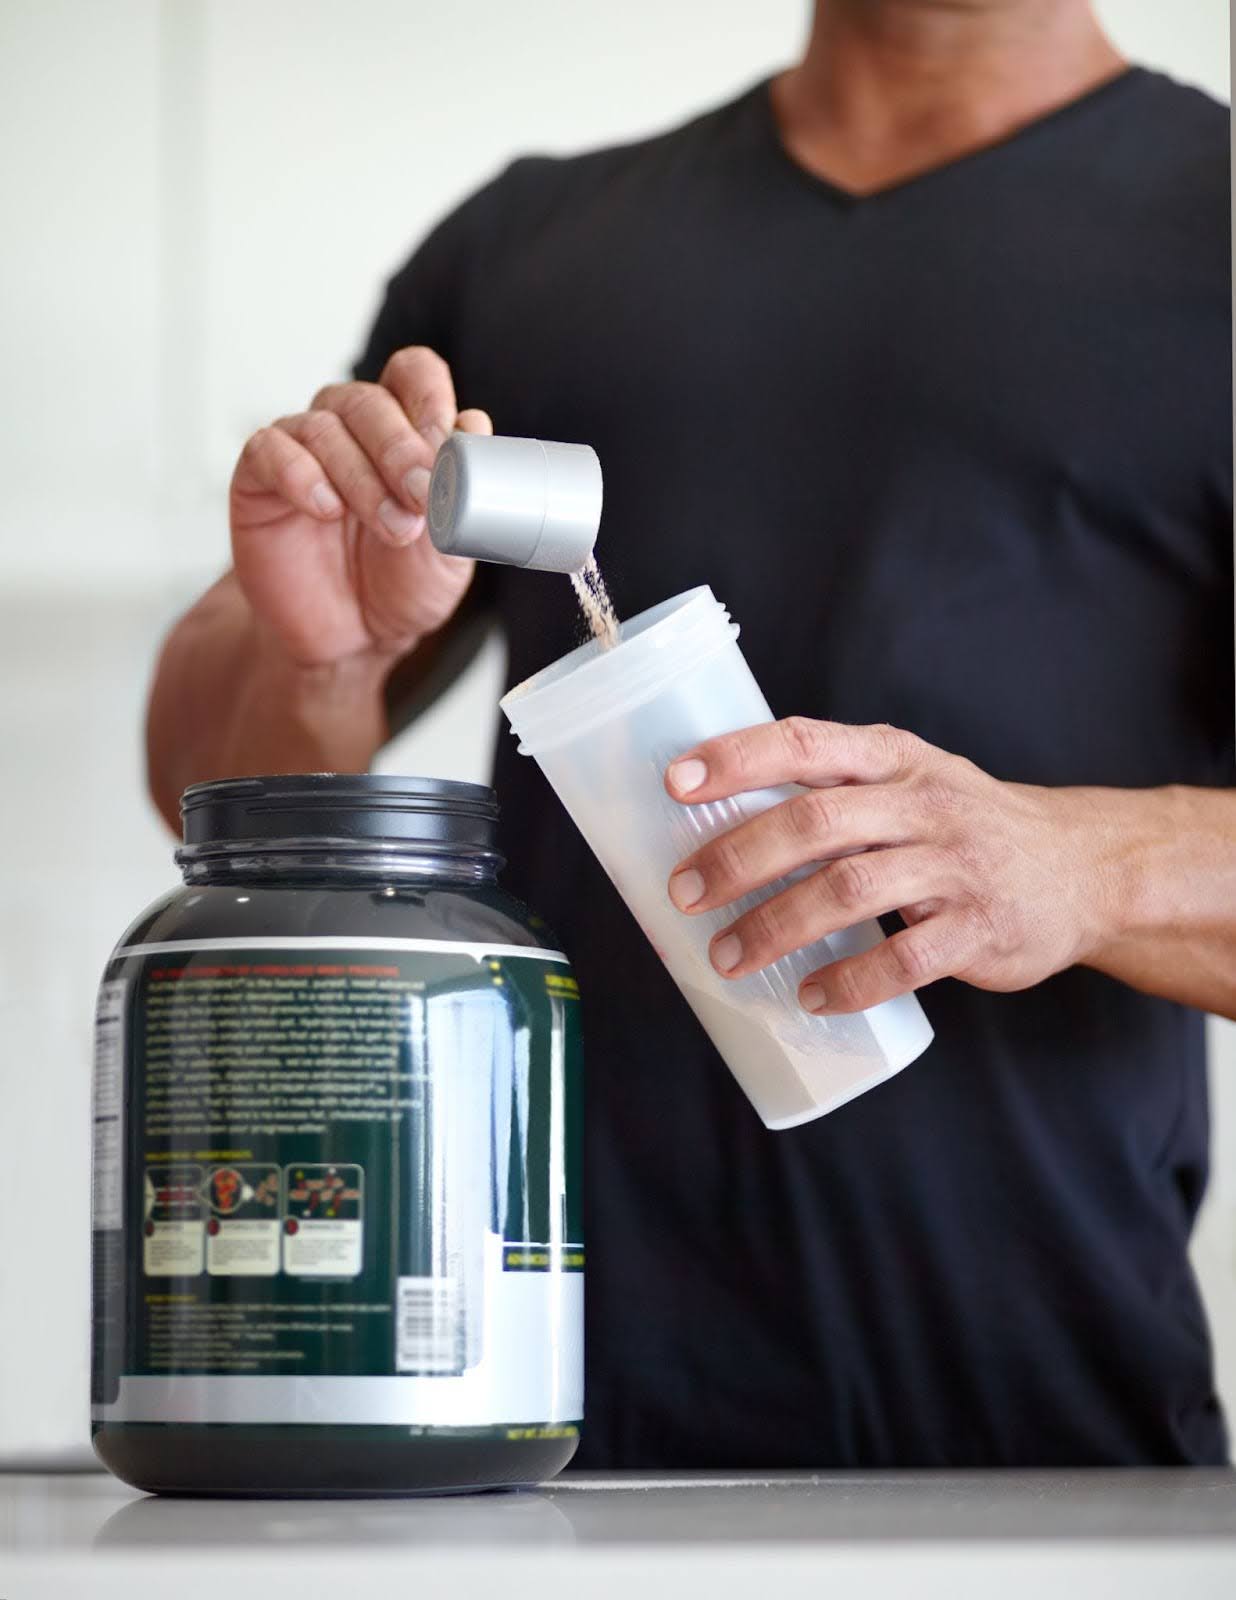 Man drinking pre-workout supplement before going to the gym